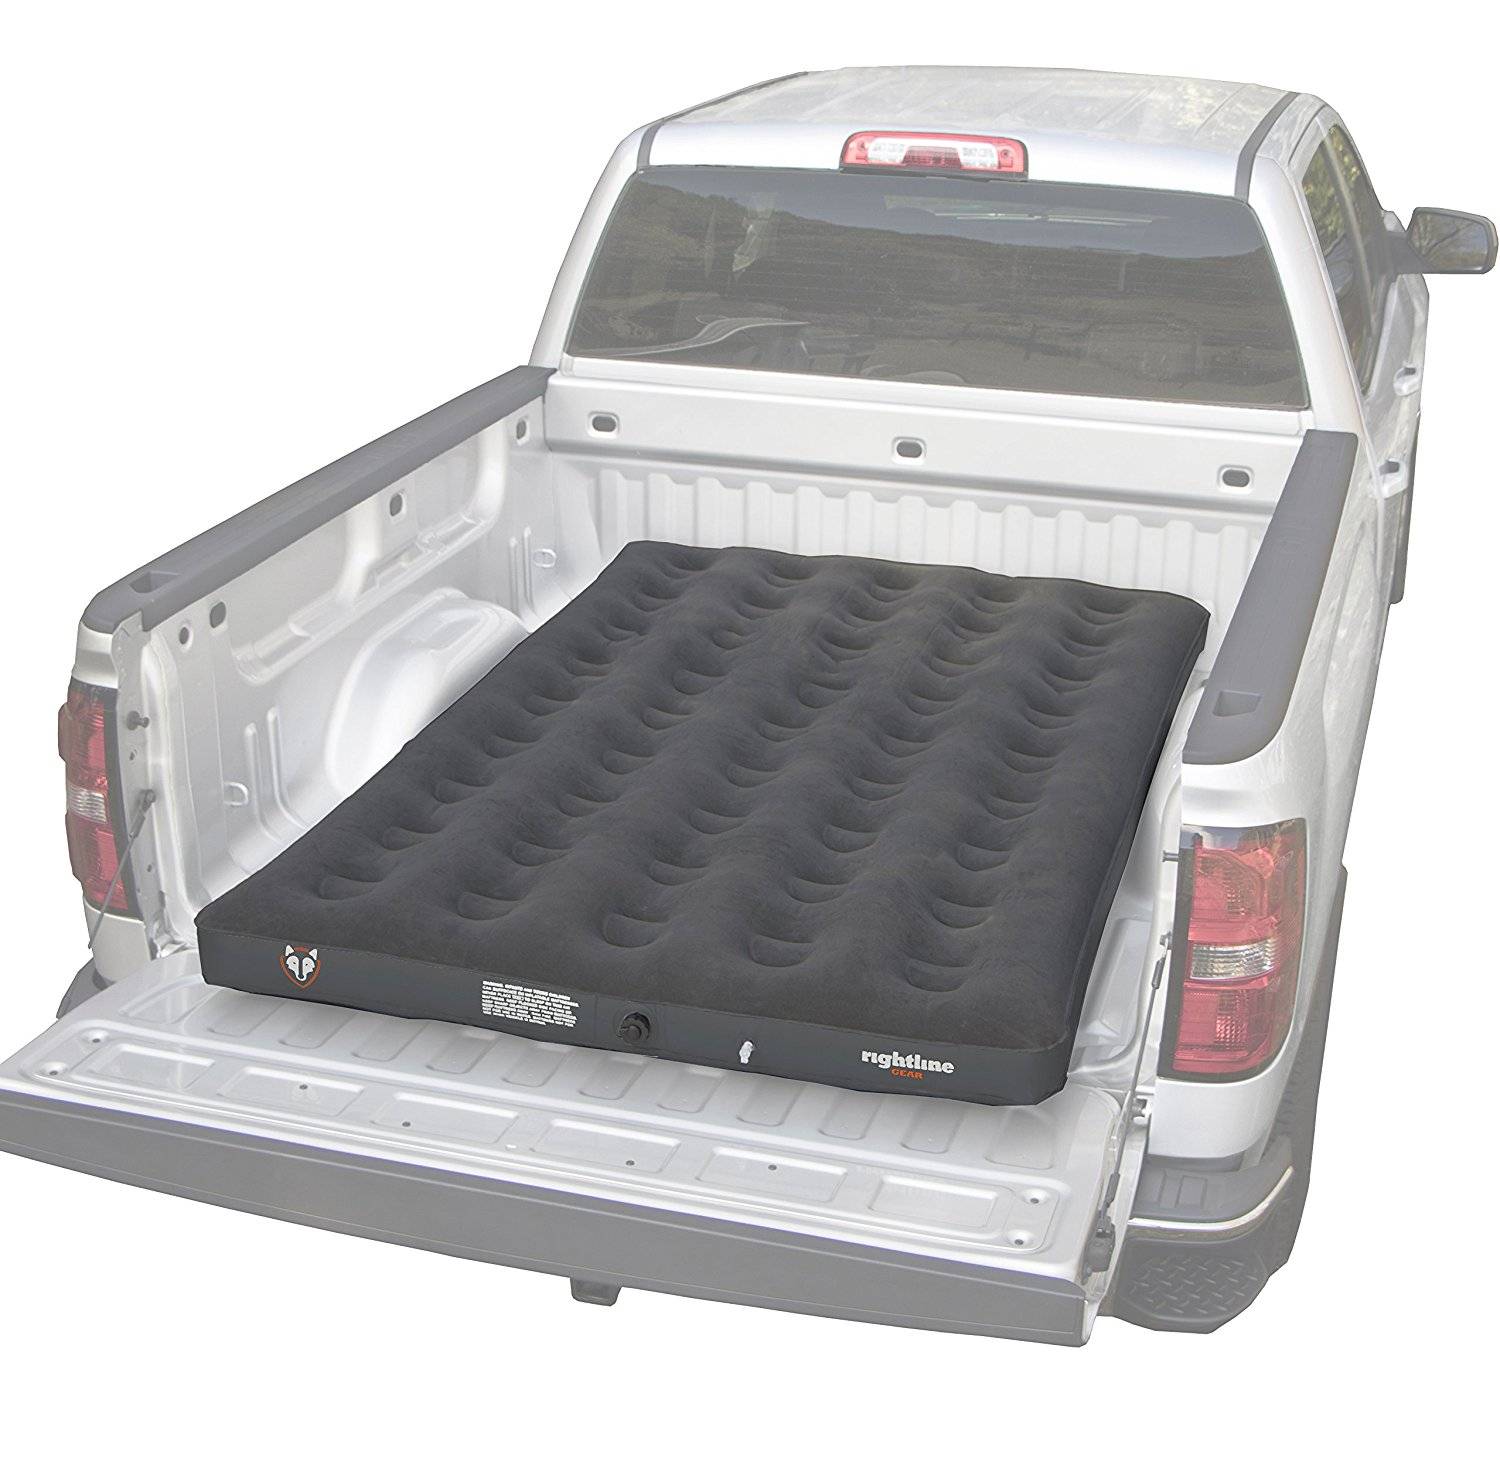 Rightline Gear Mid Size Truck Bed Inflatable Air Mattress